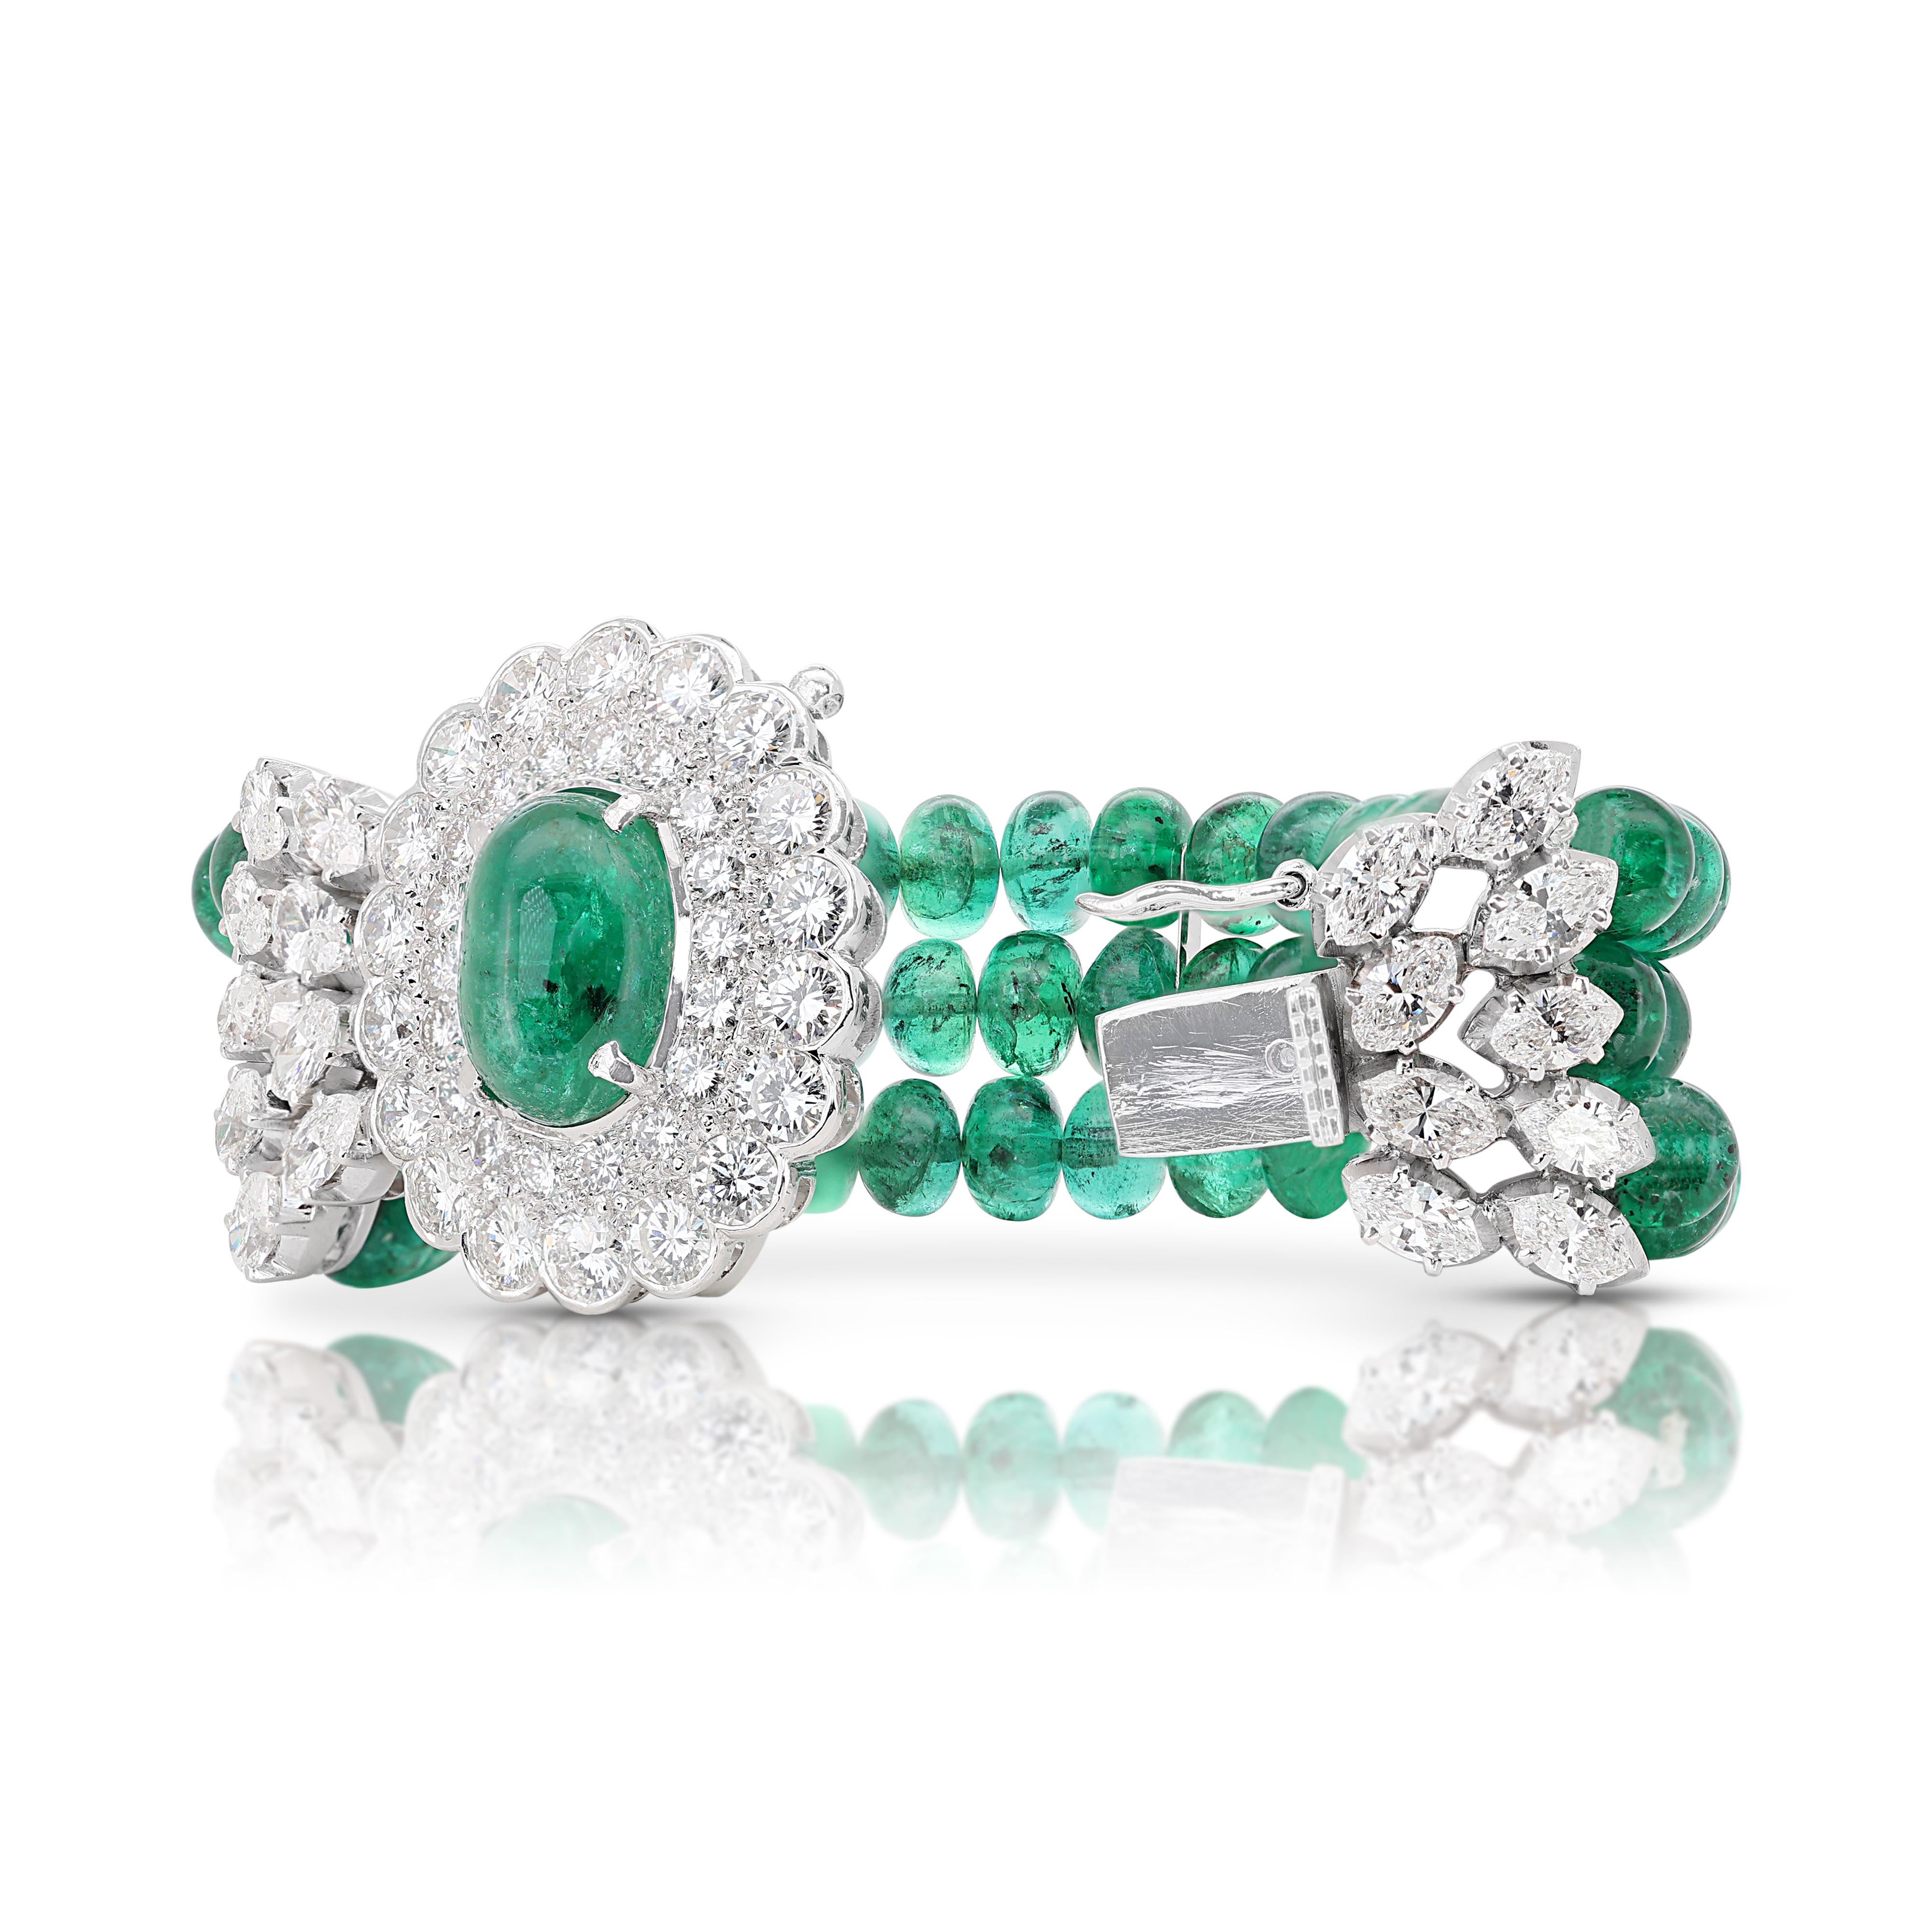 Stunning 4.76ct Emerald Bracelet with Diamonds in 18K White Gold  In Excellent Condition For Sale In רמת גן, IL